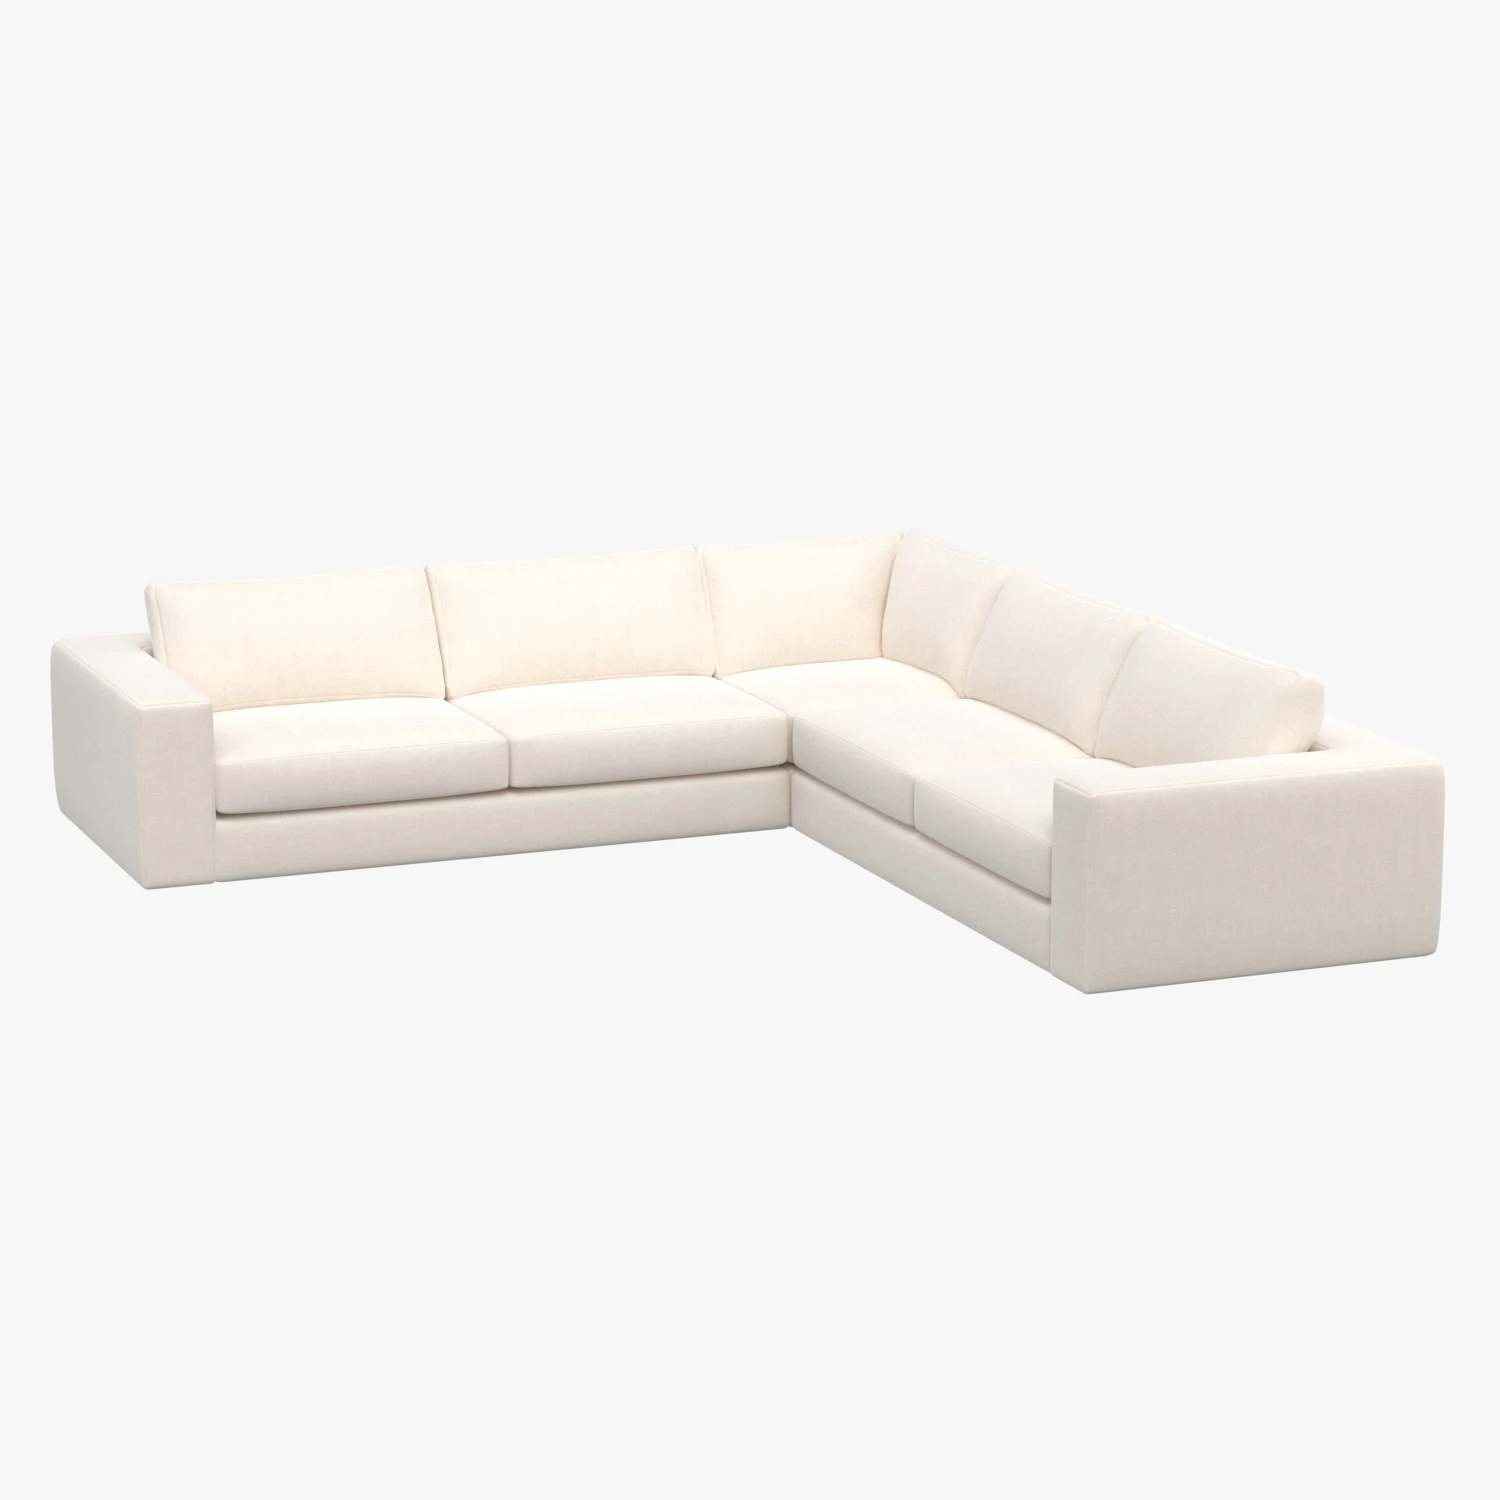 Crate and Barrel Sofa Collection 02 3D Model_09